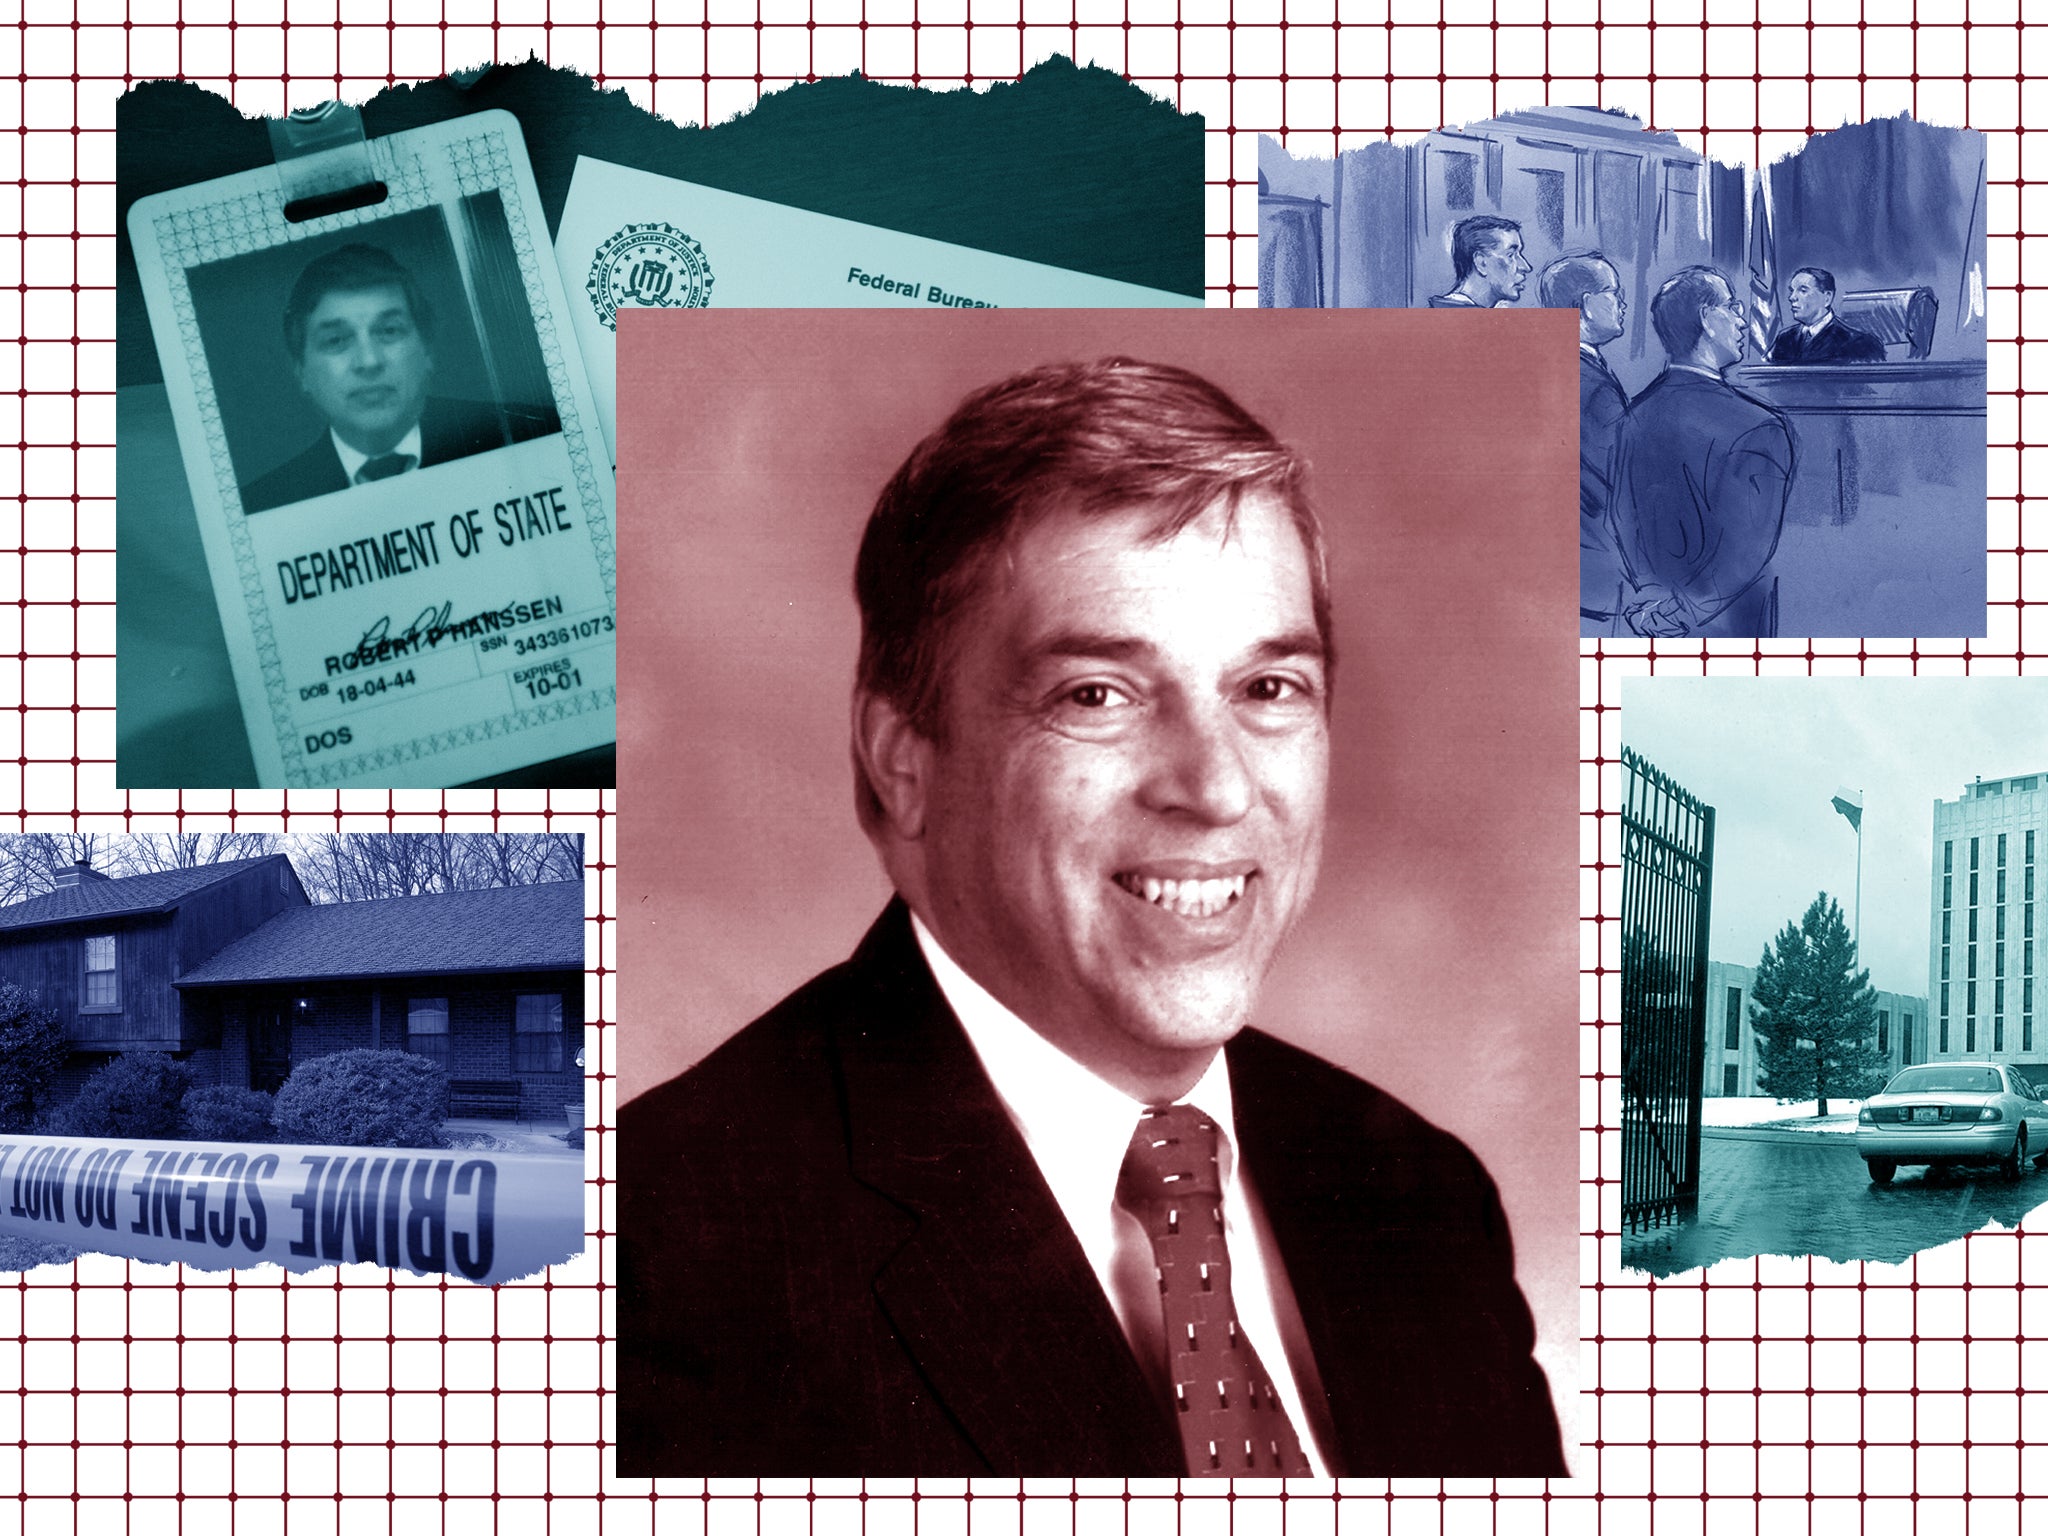 Robert Hanssen His pious life and secret career of treason The Independent